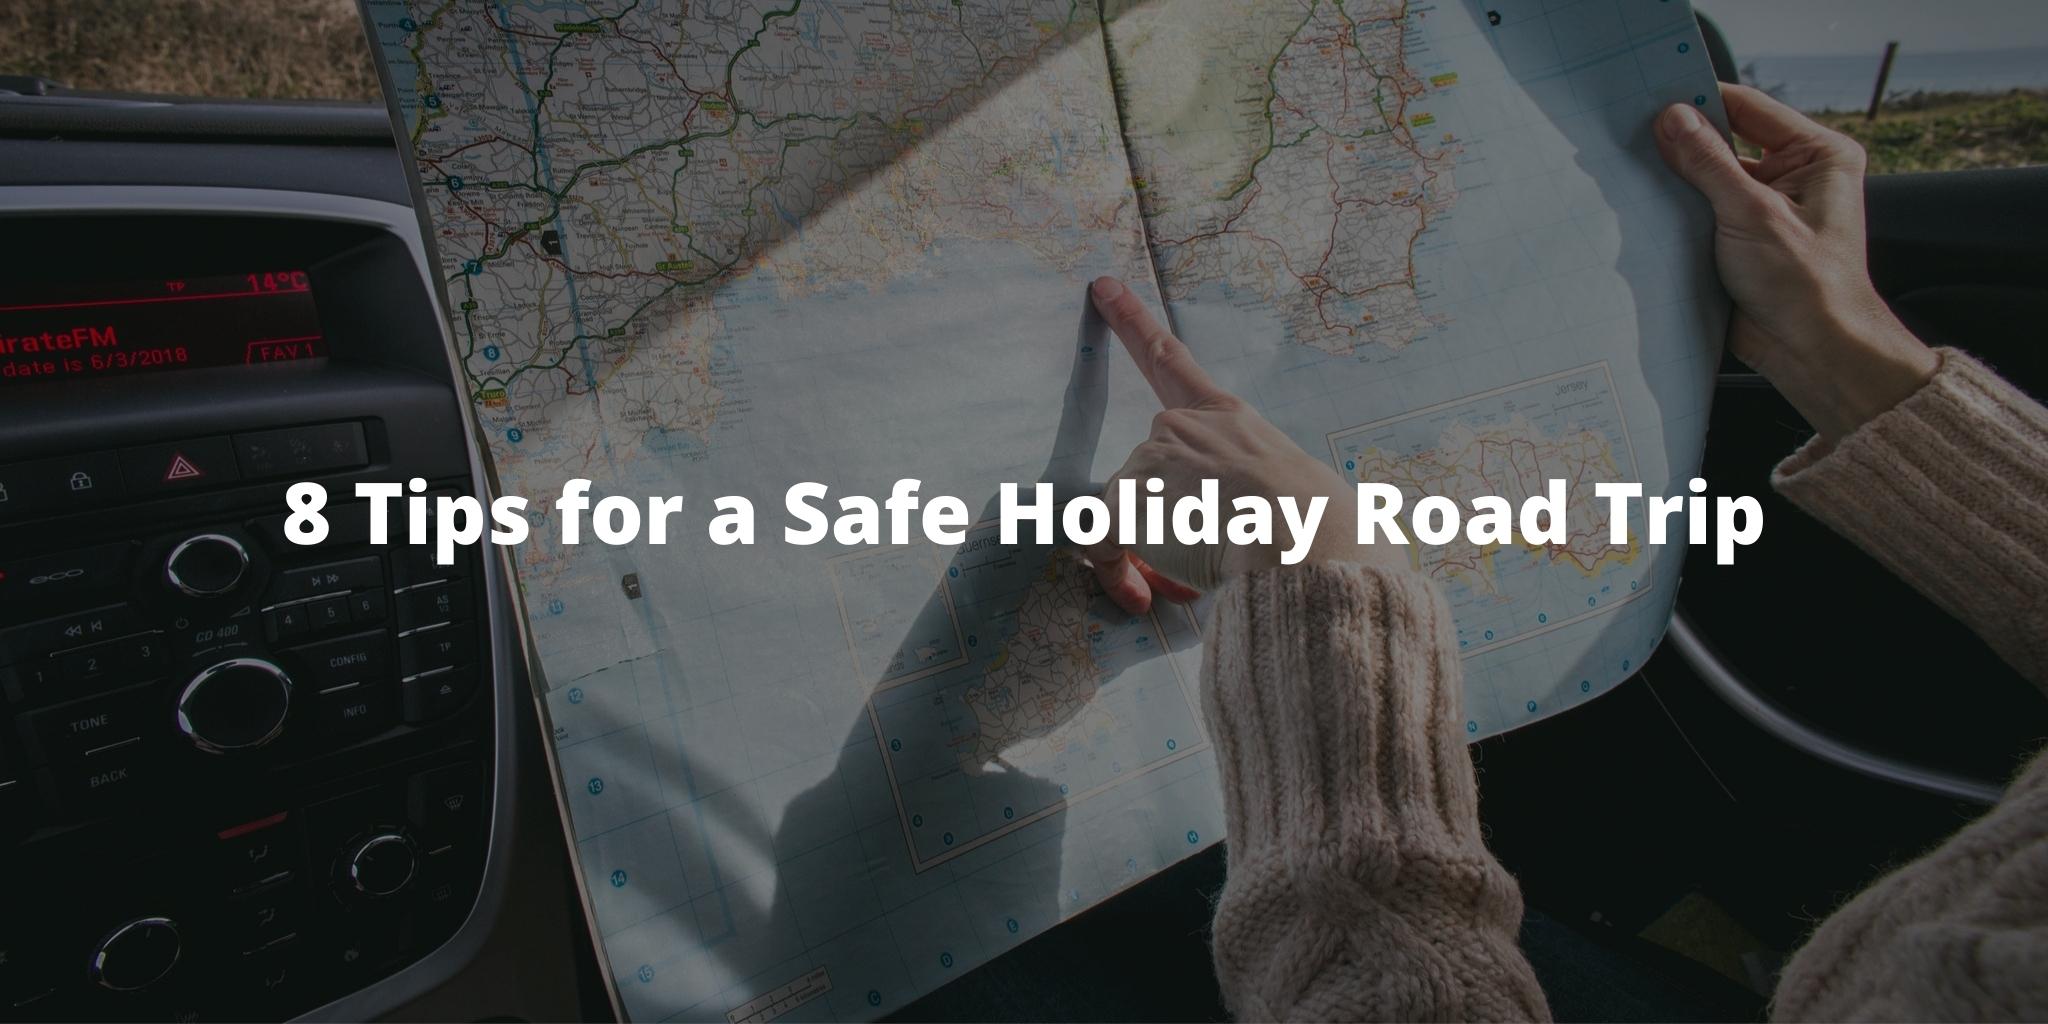 8 Tips for a Safe Holiday Road Trip